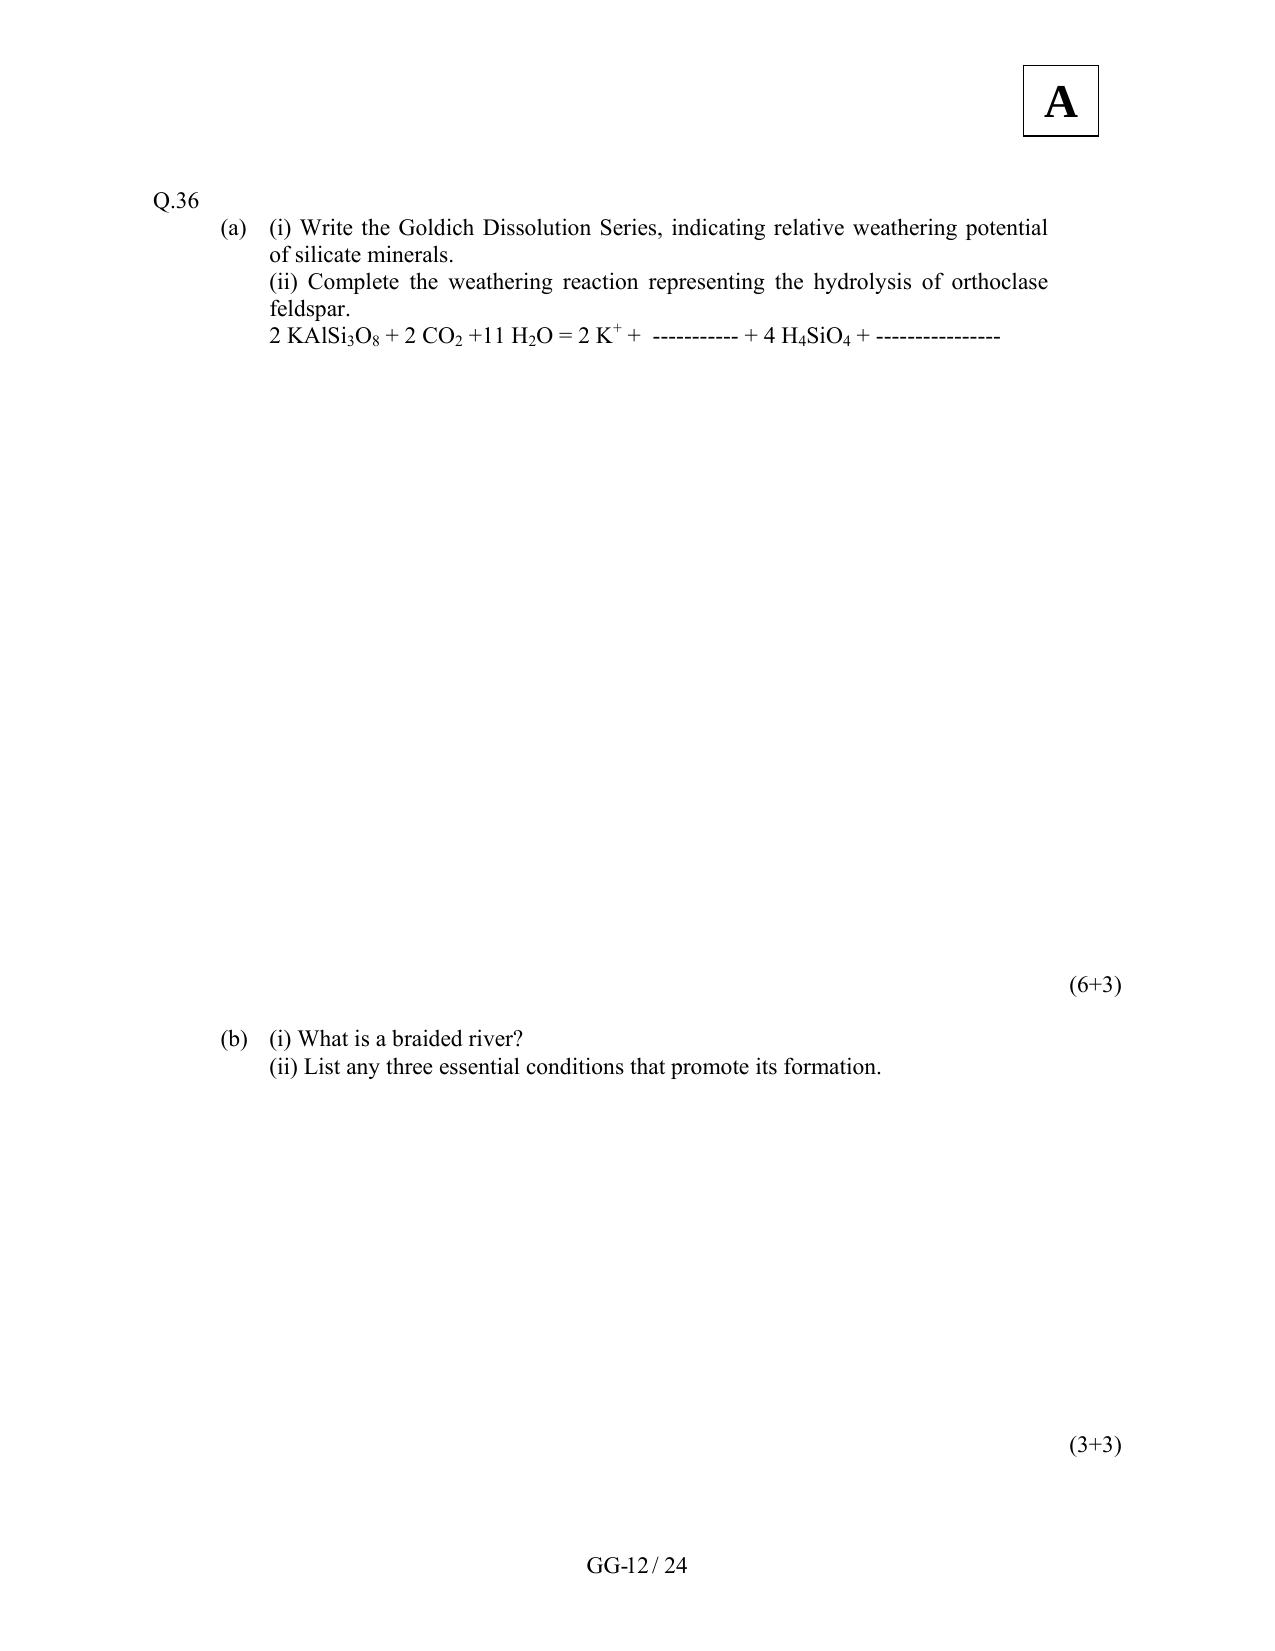 JAM 2012: GG Question Paper - Page 14